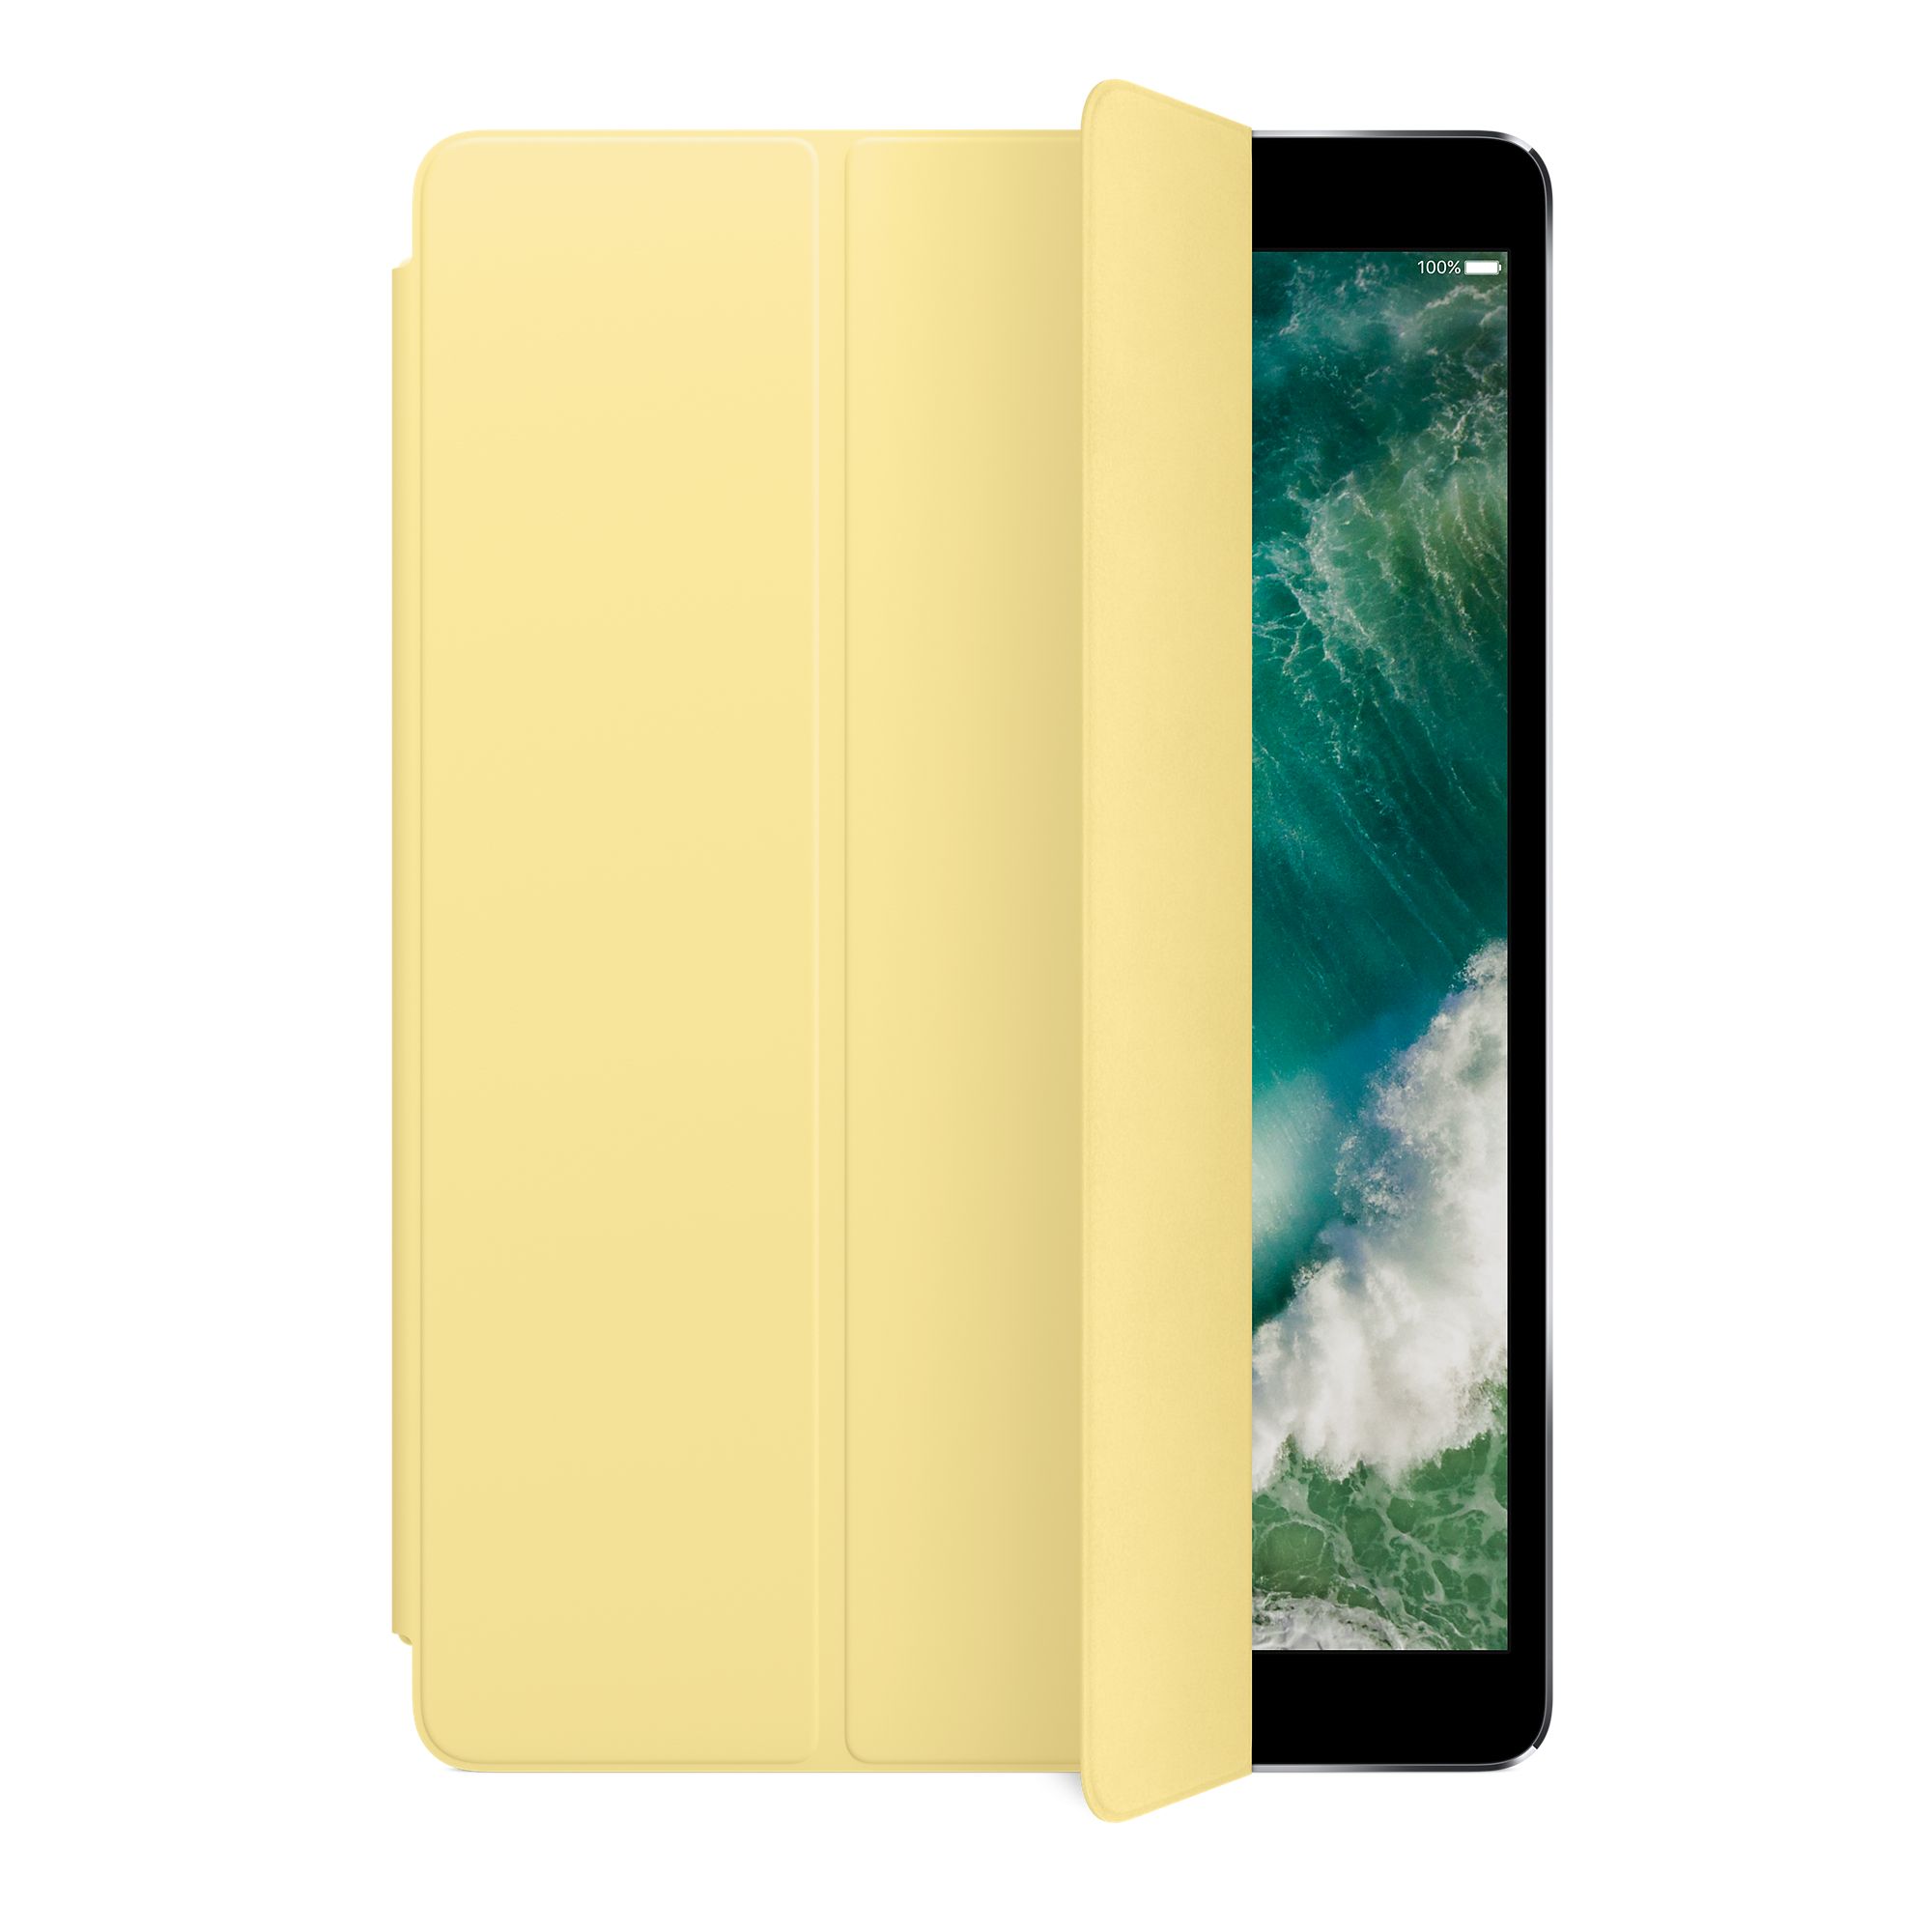 Accessories for New iPad Pro